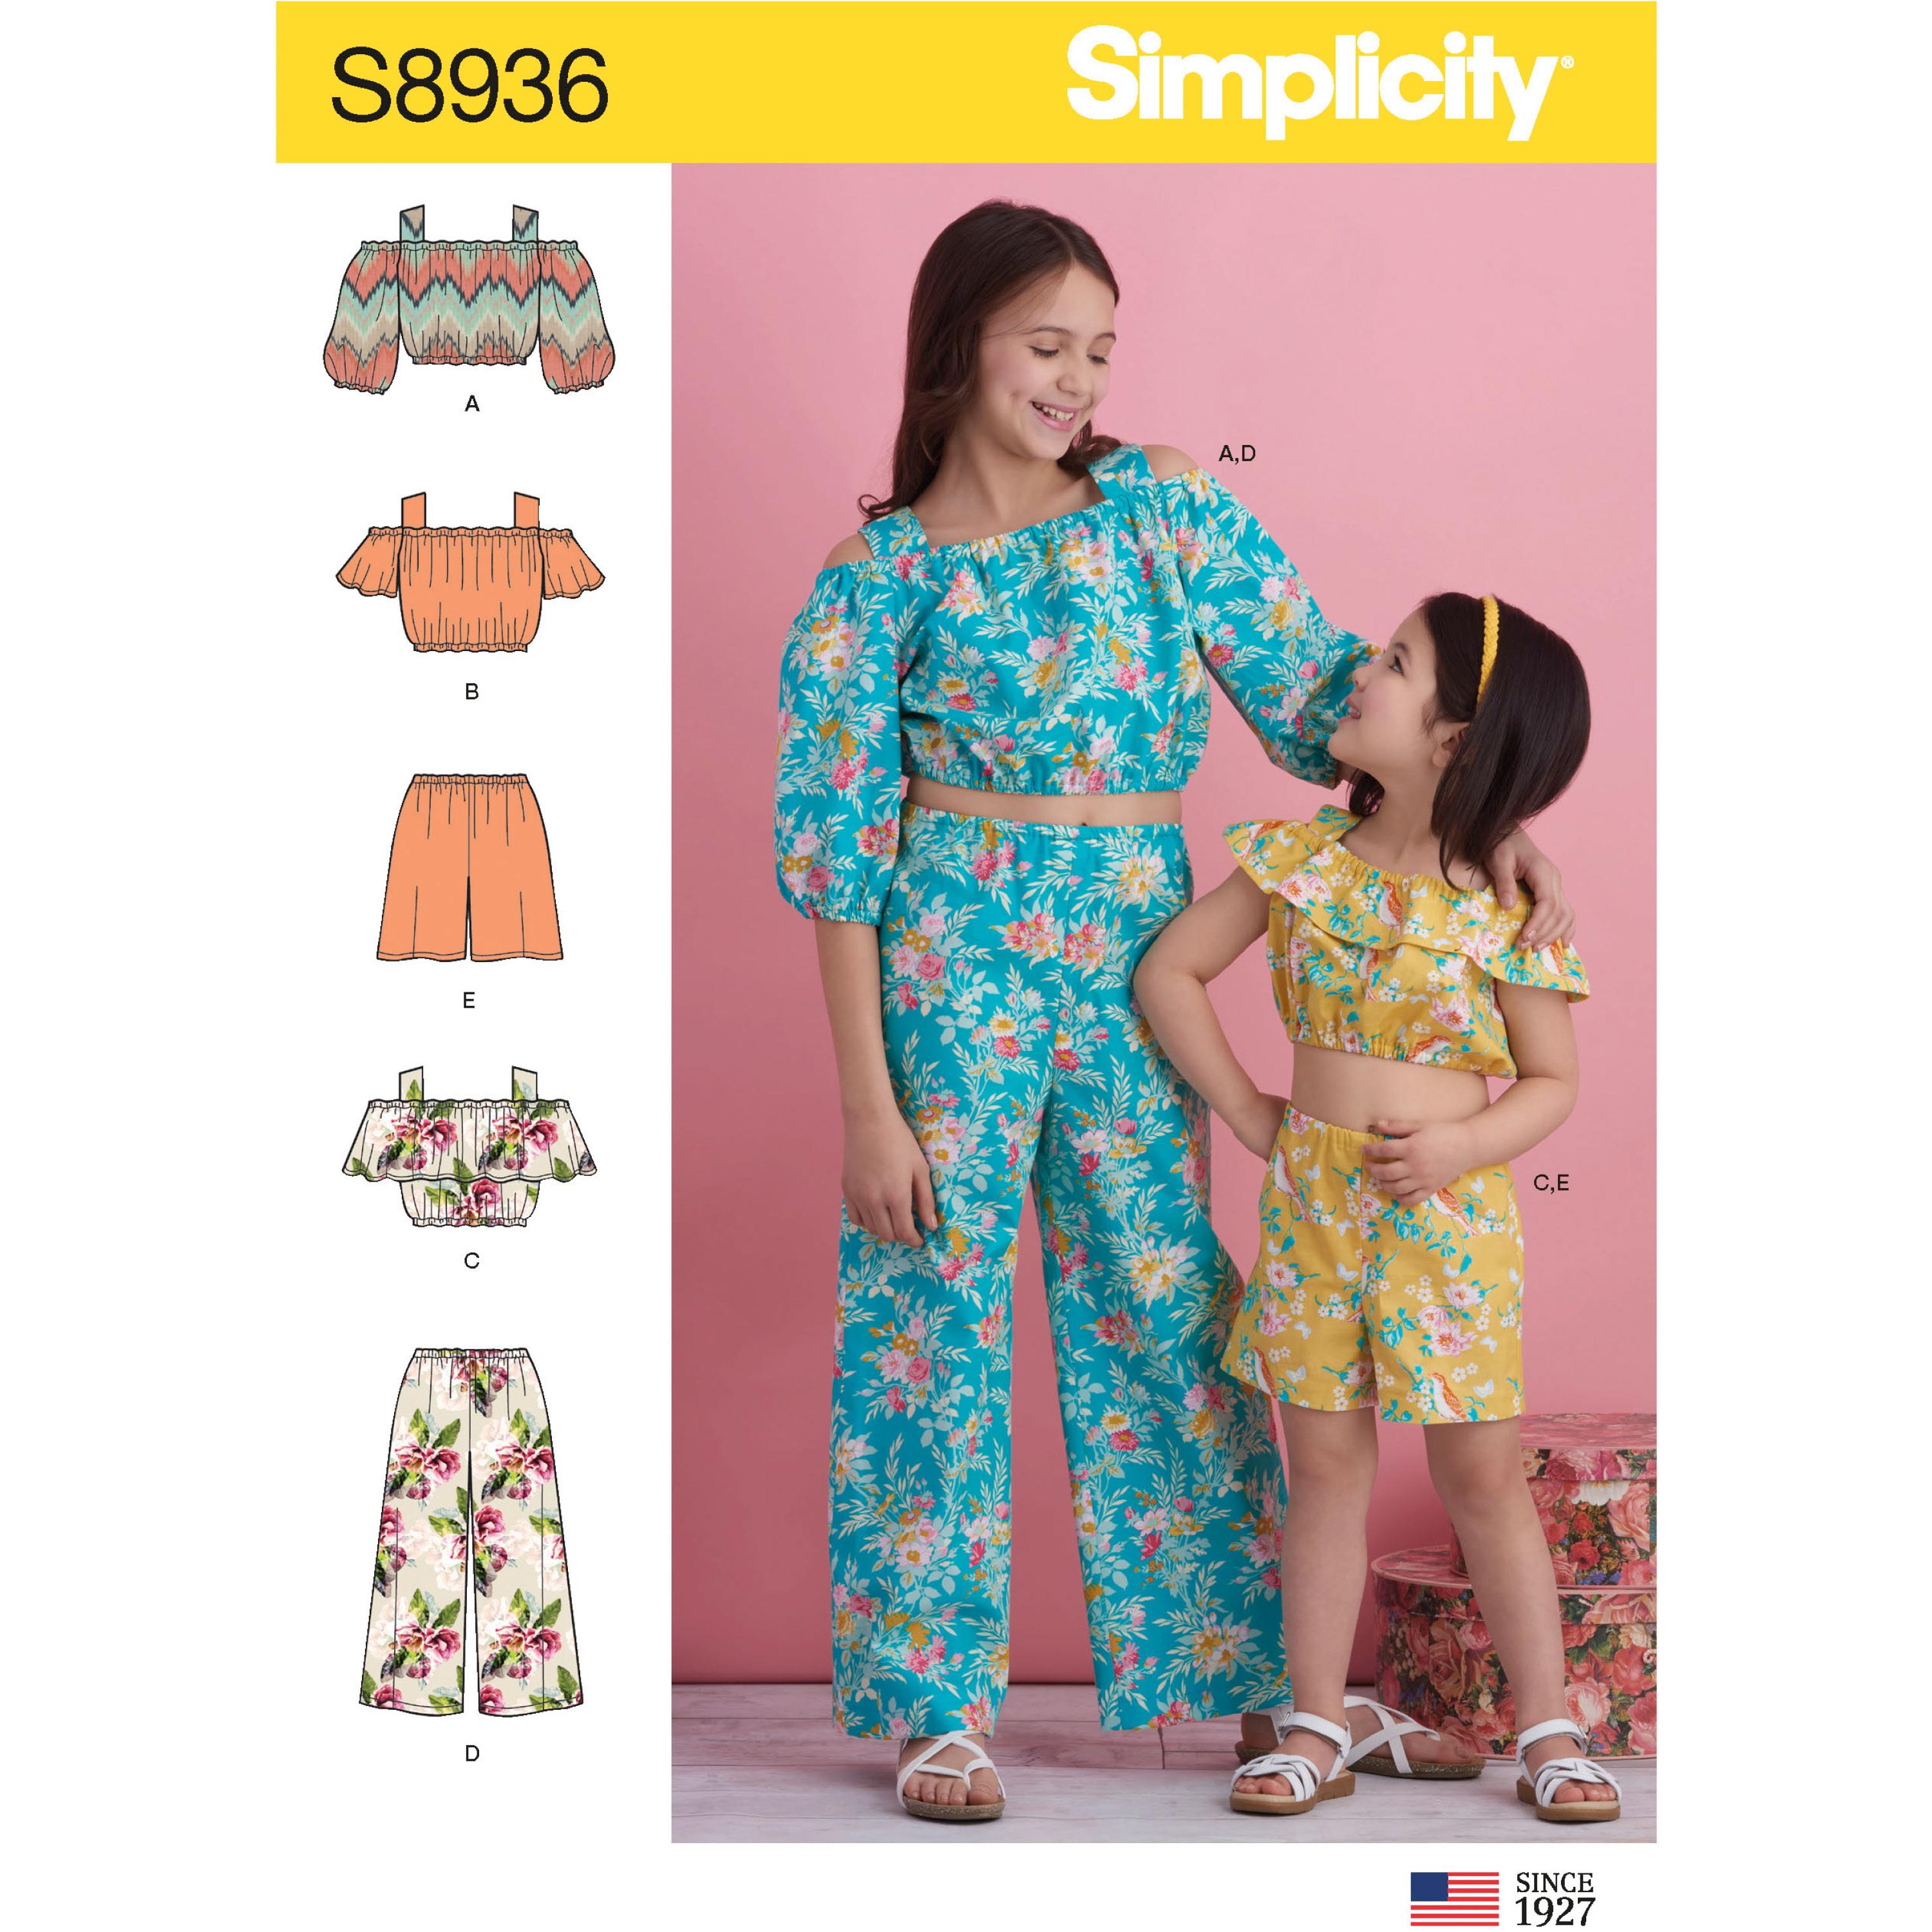 Simplicity S8936 Children's and Girl's Tops, Pants and Shorts